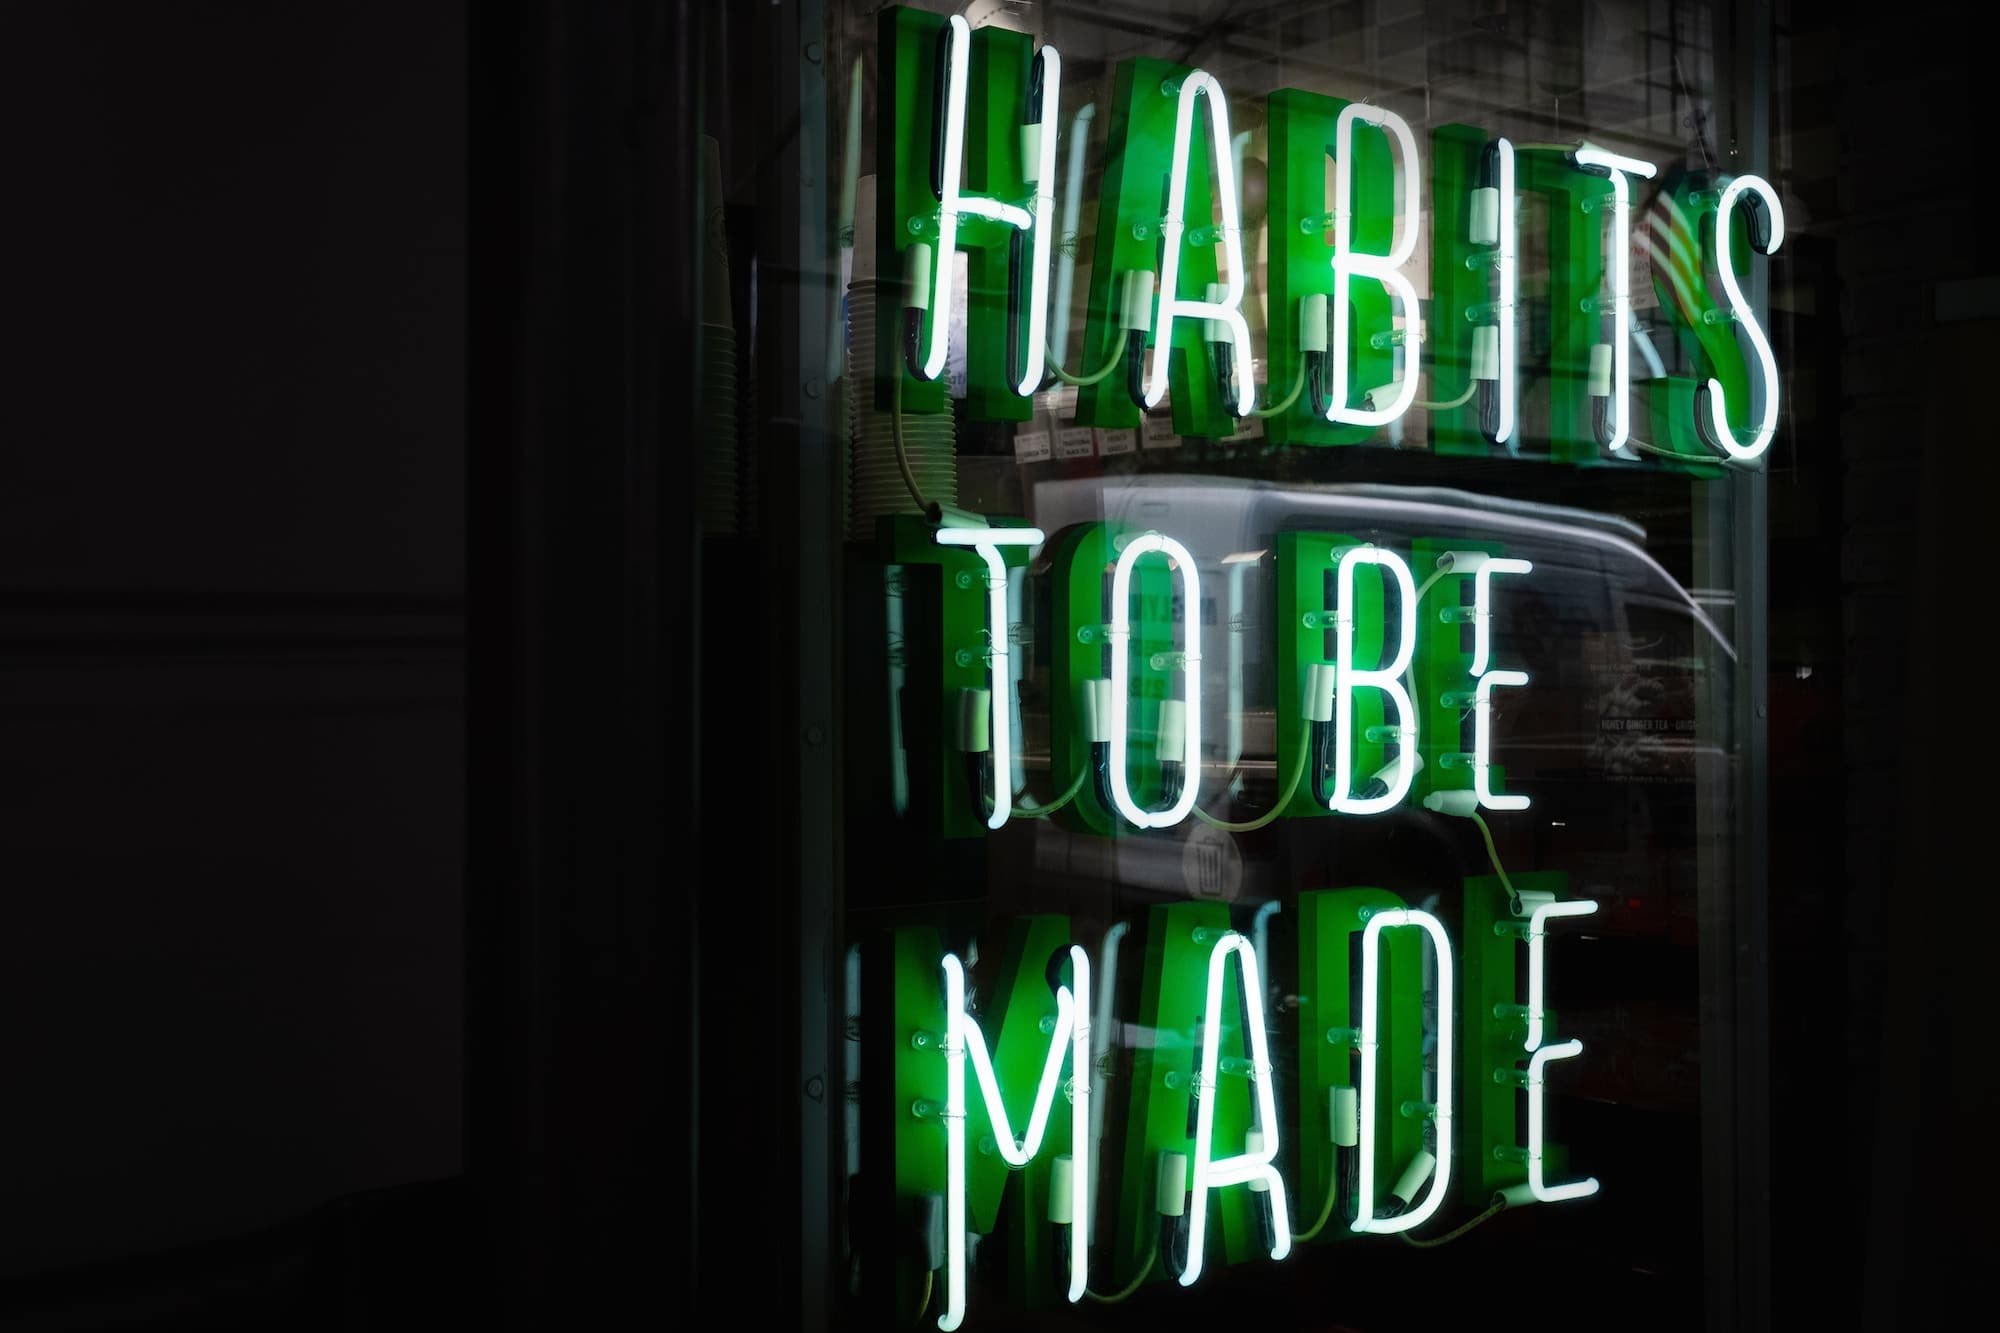 Neon sign saying "Habits To Be Made"